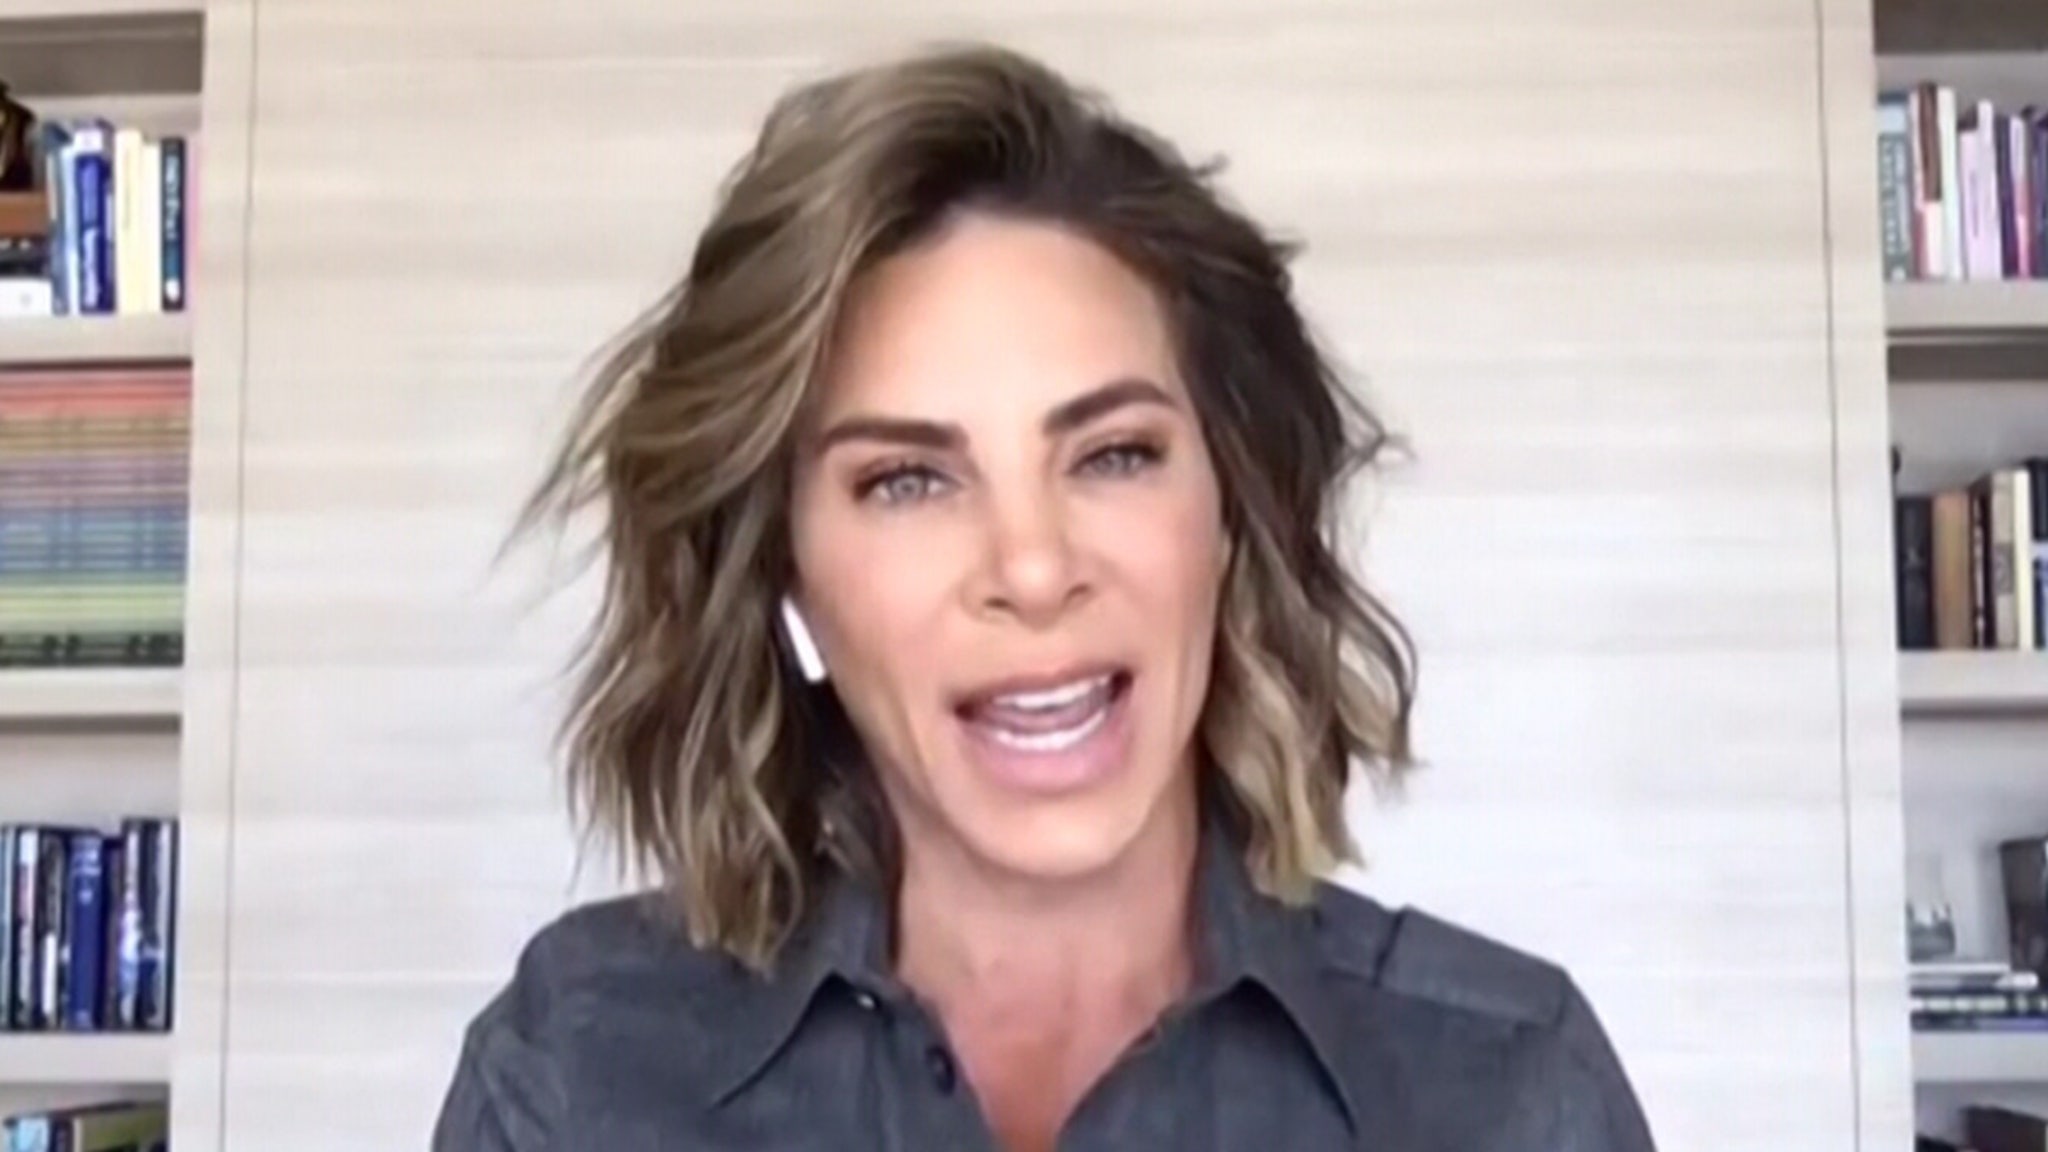 Jillian Michaels says gyms will reverse the pandemic